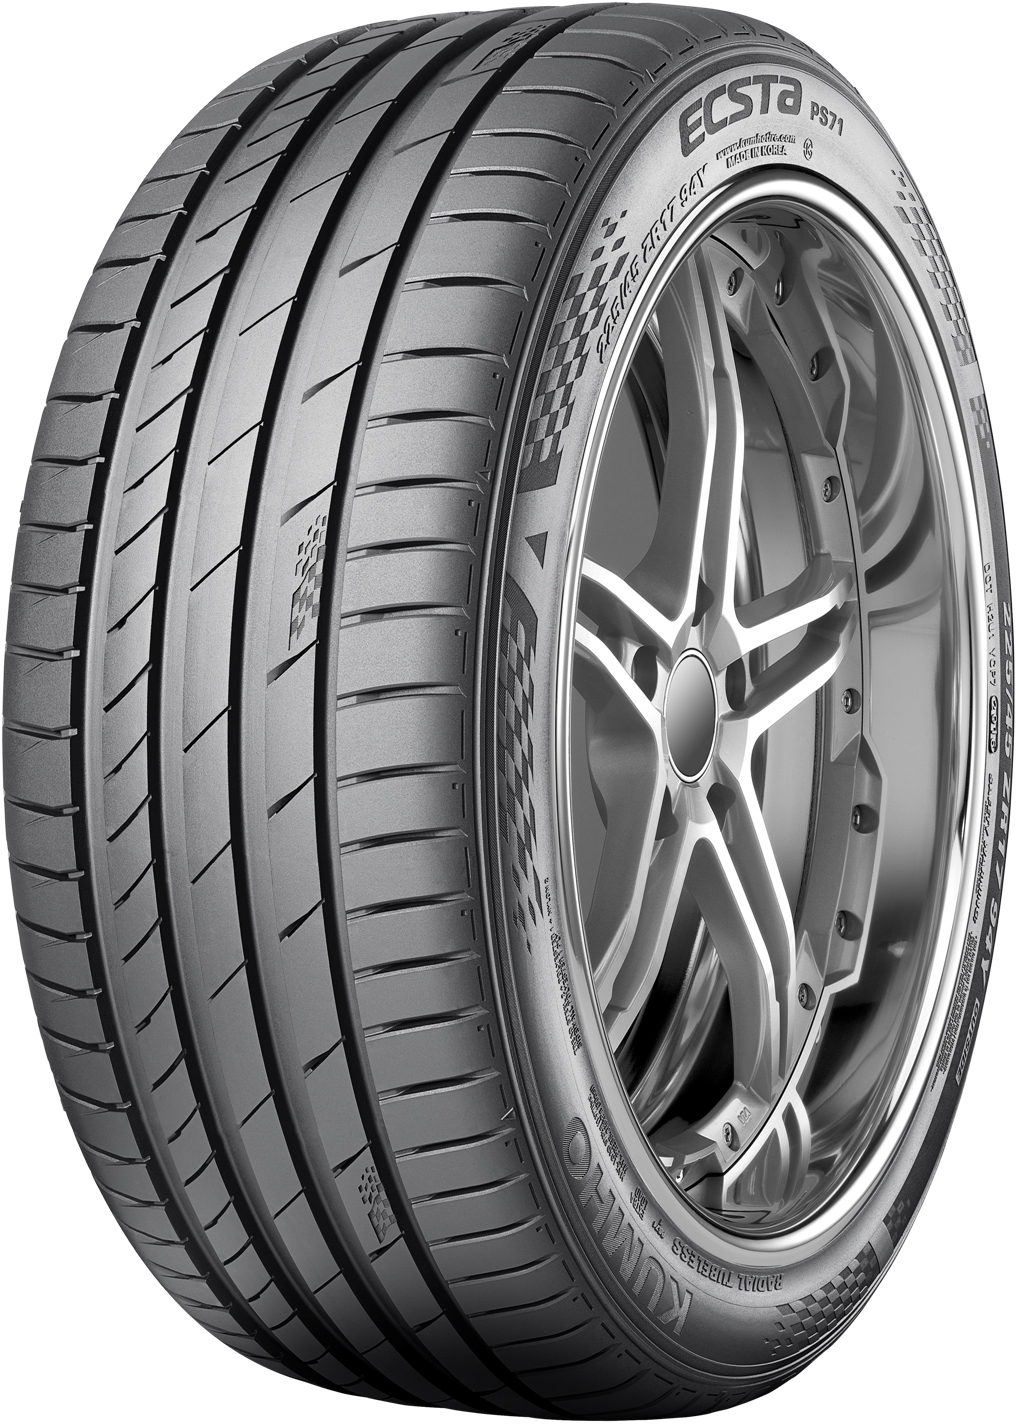 Anvelope auto KUMHO PS71RFT RFT 225/55 R17 97Y